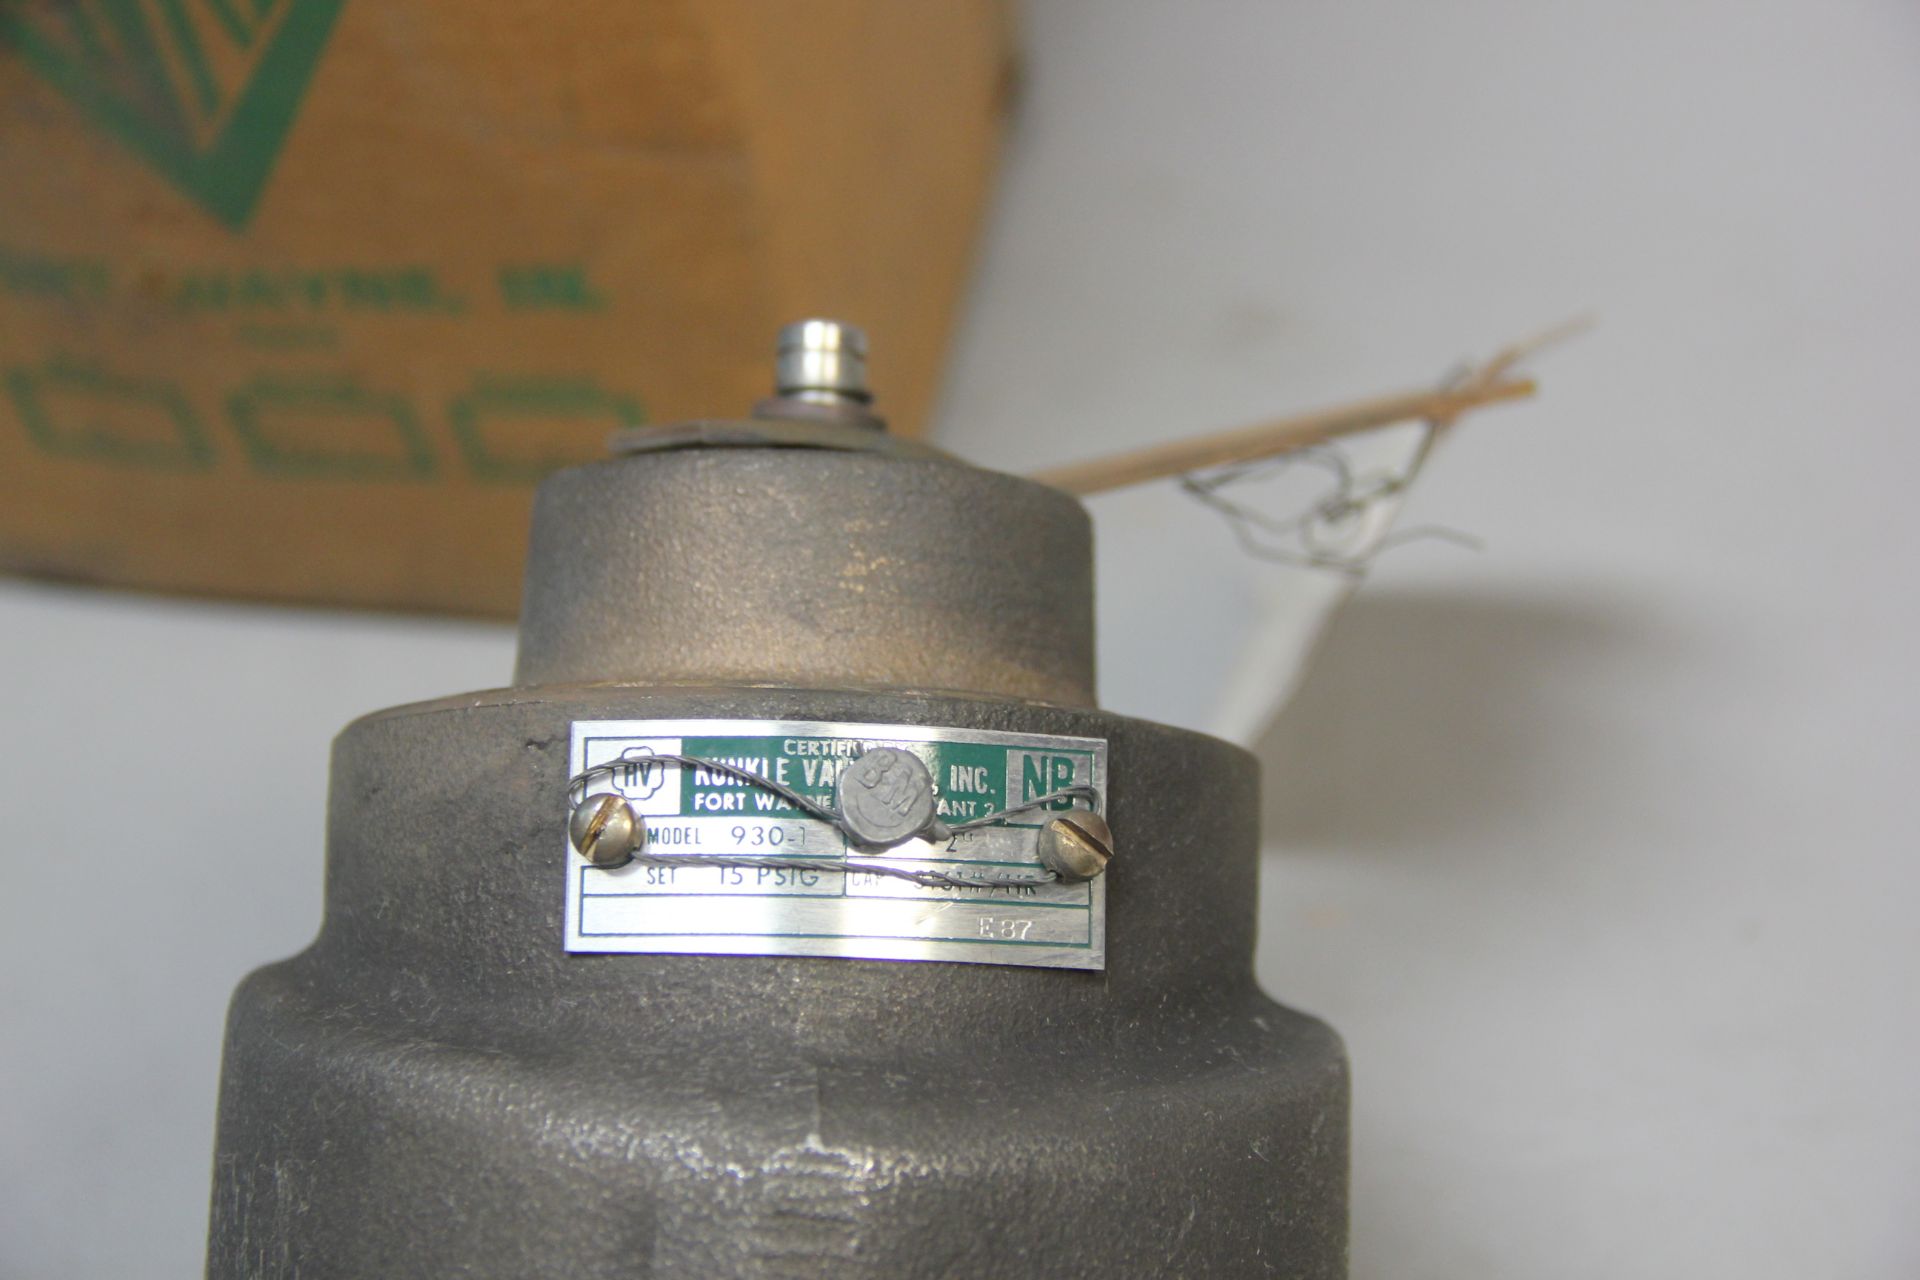 NEW KUNKLE 2" SAFETY RELIEF VALVE - Image 5 of 5